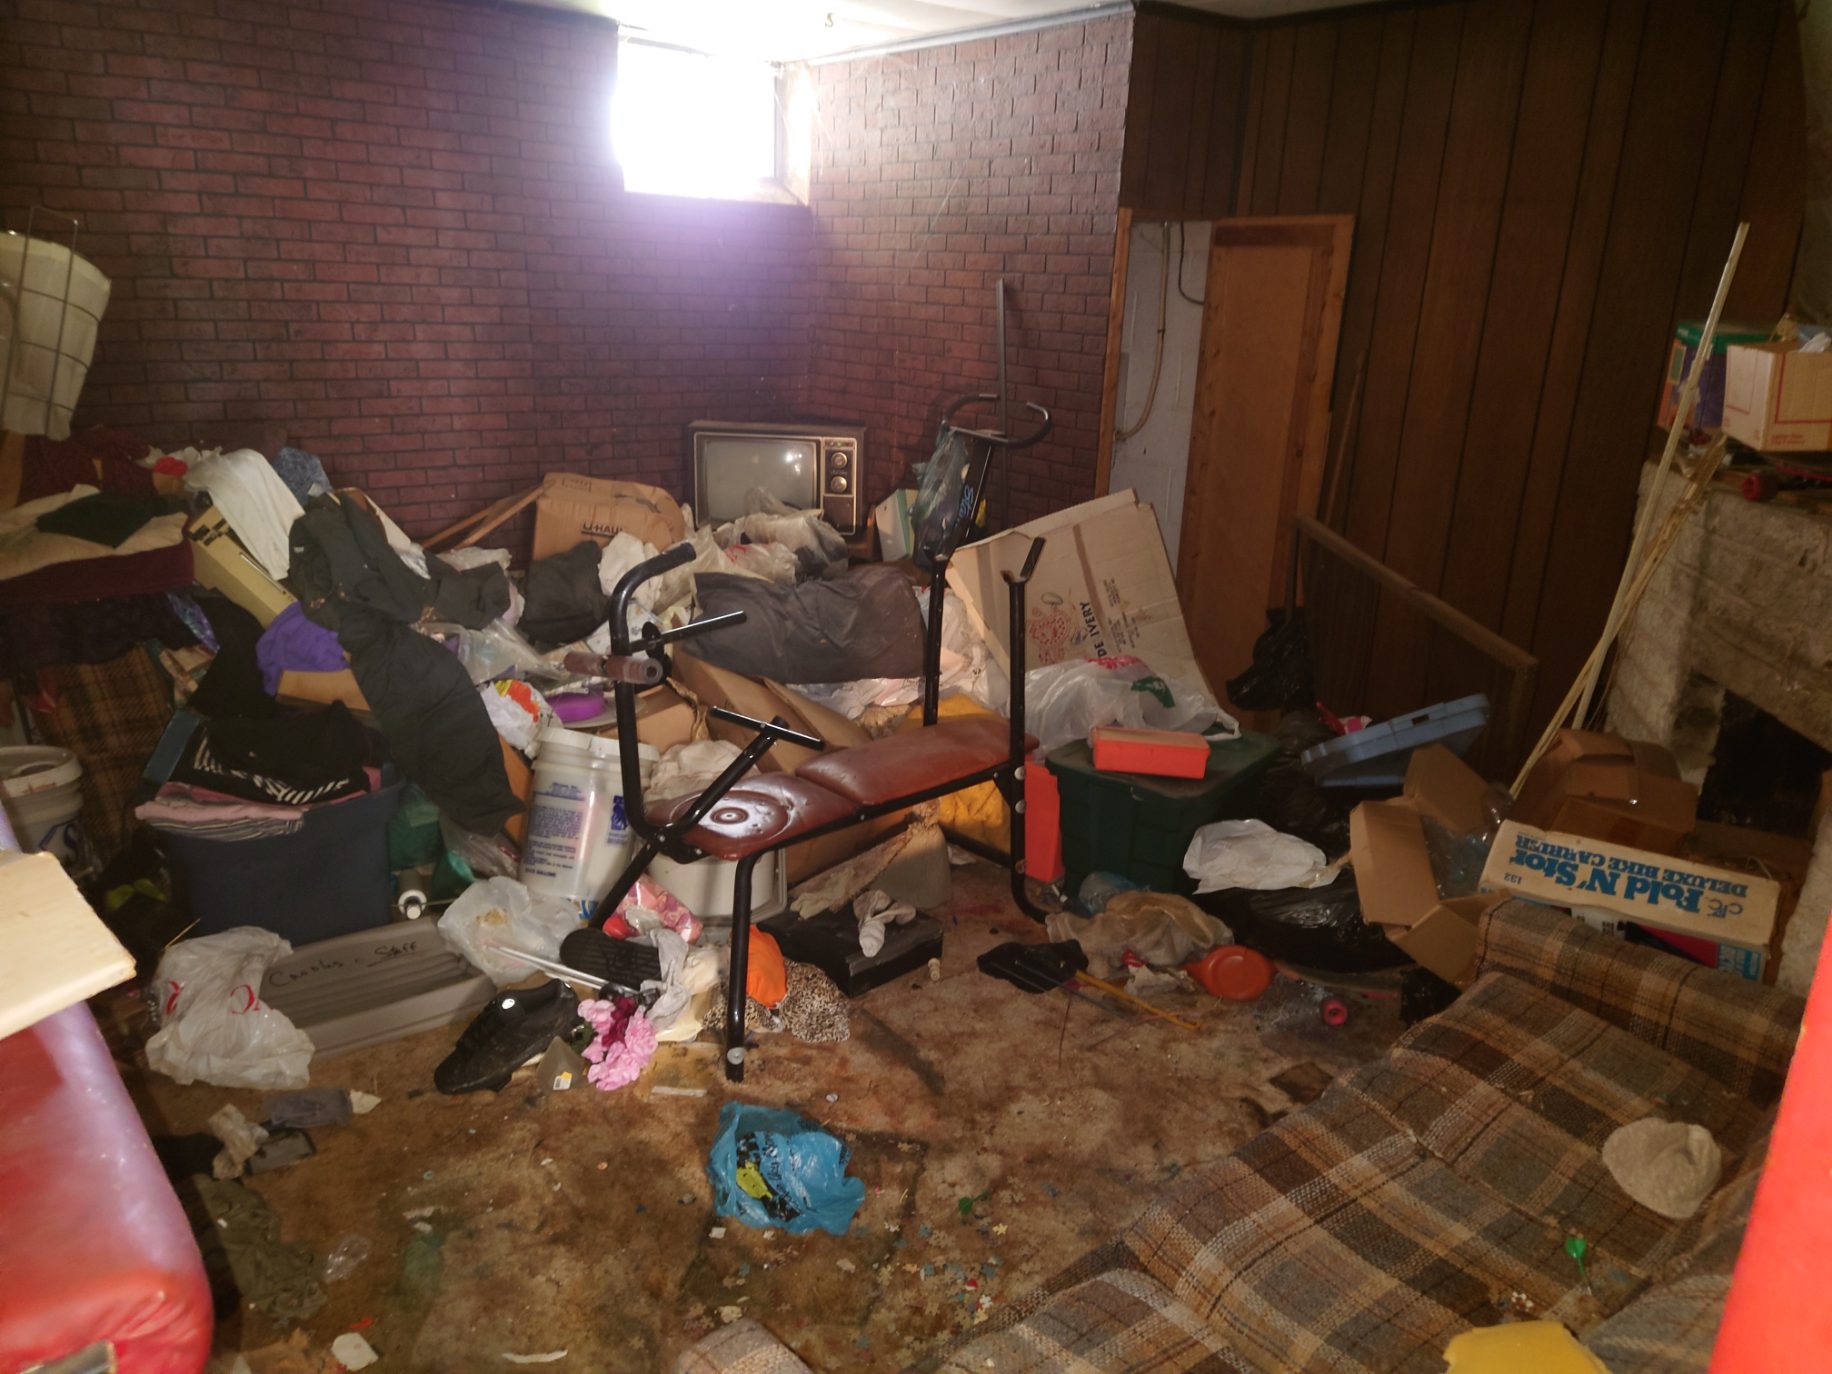 Hire a Harford County Junk Removal Expert to Declutter Your Basement